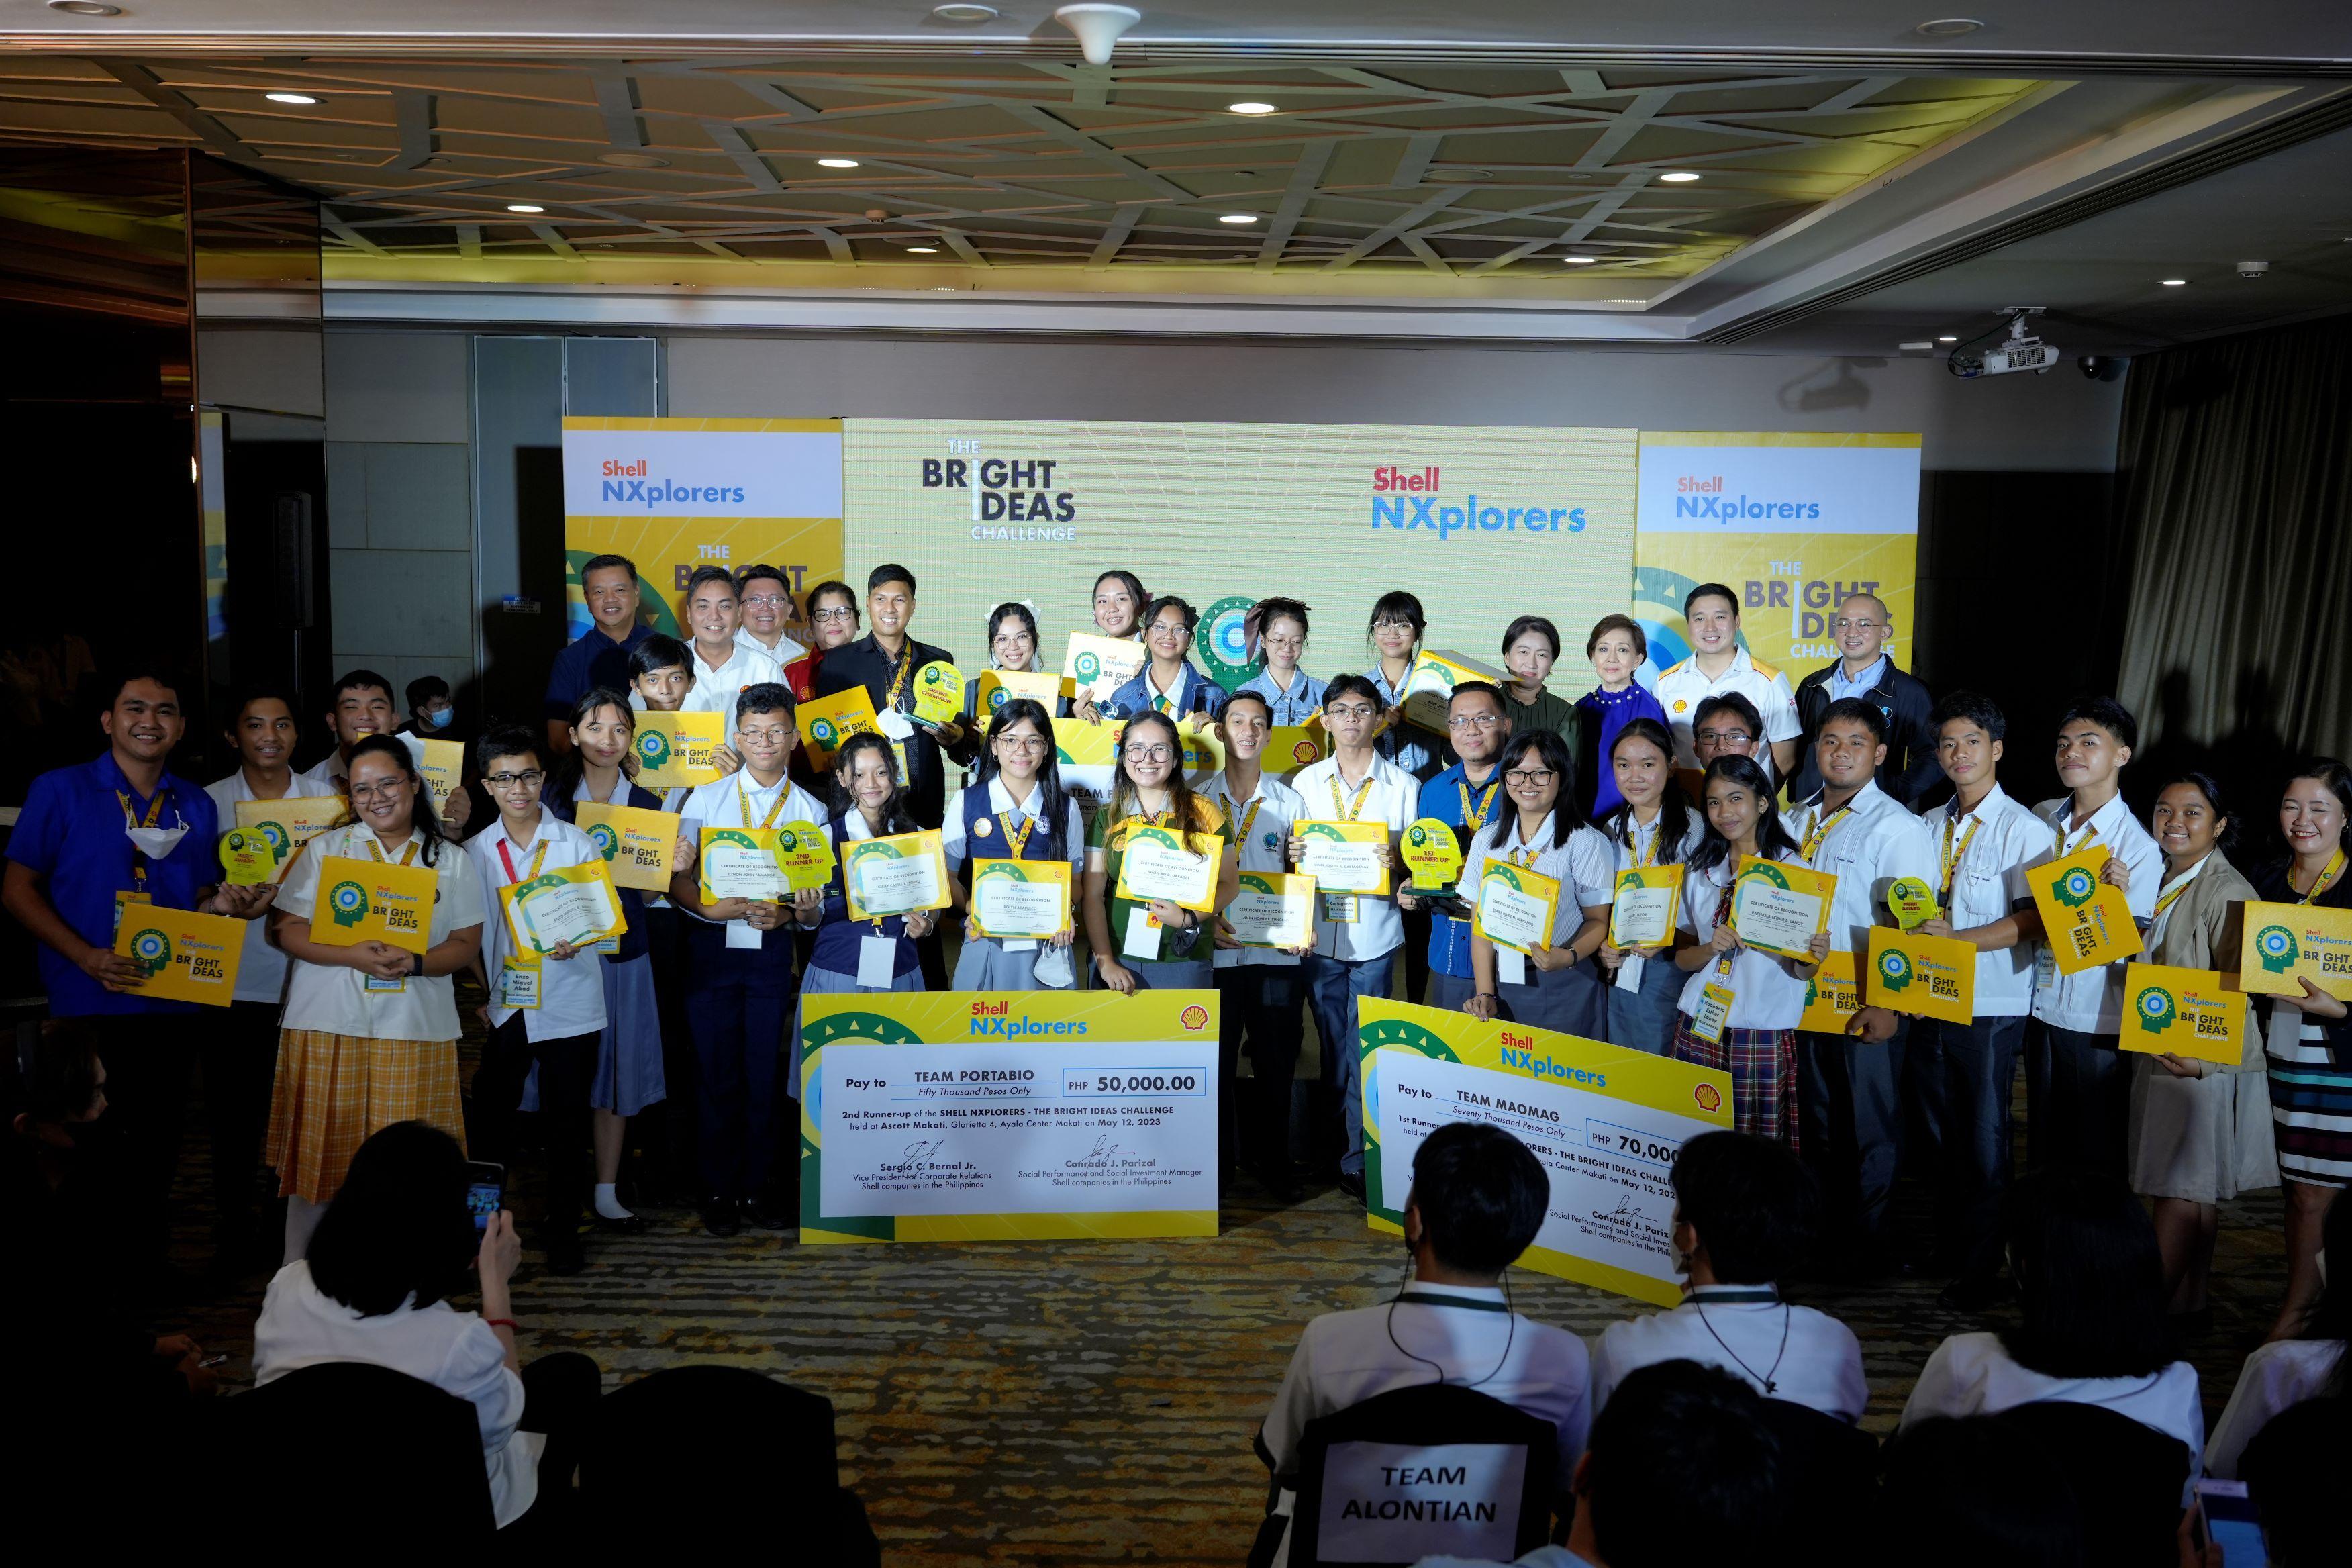 FarmHer Innovators, a Palawan student team, won the grand prize at the Shell NXplorers event in the Philippines